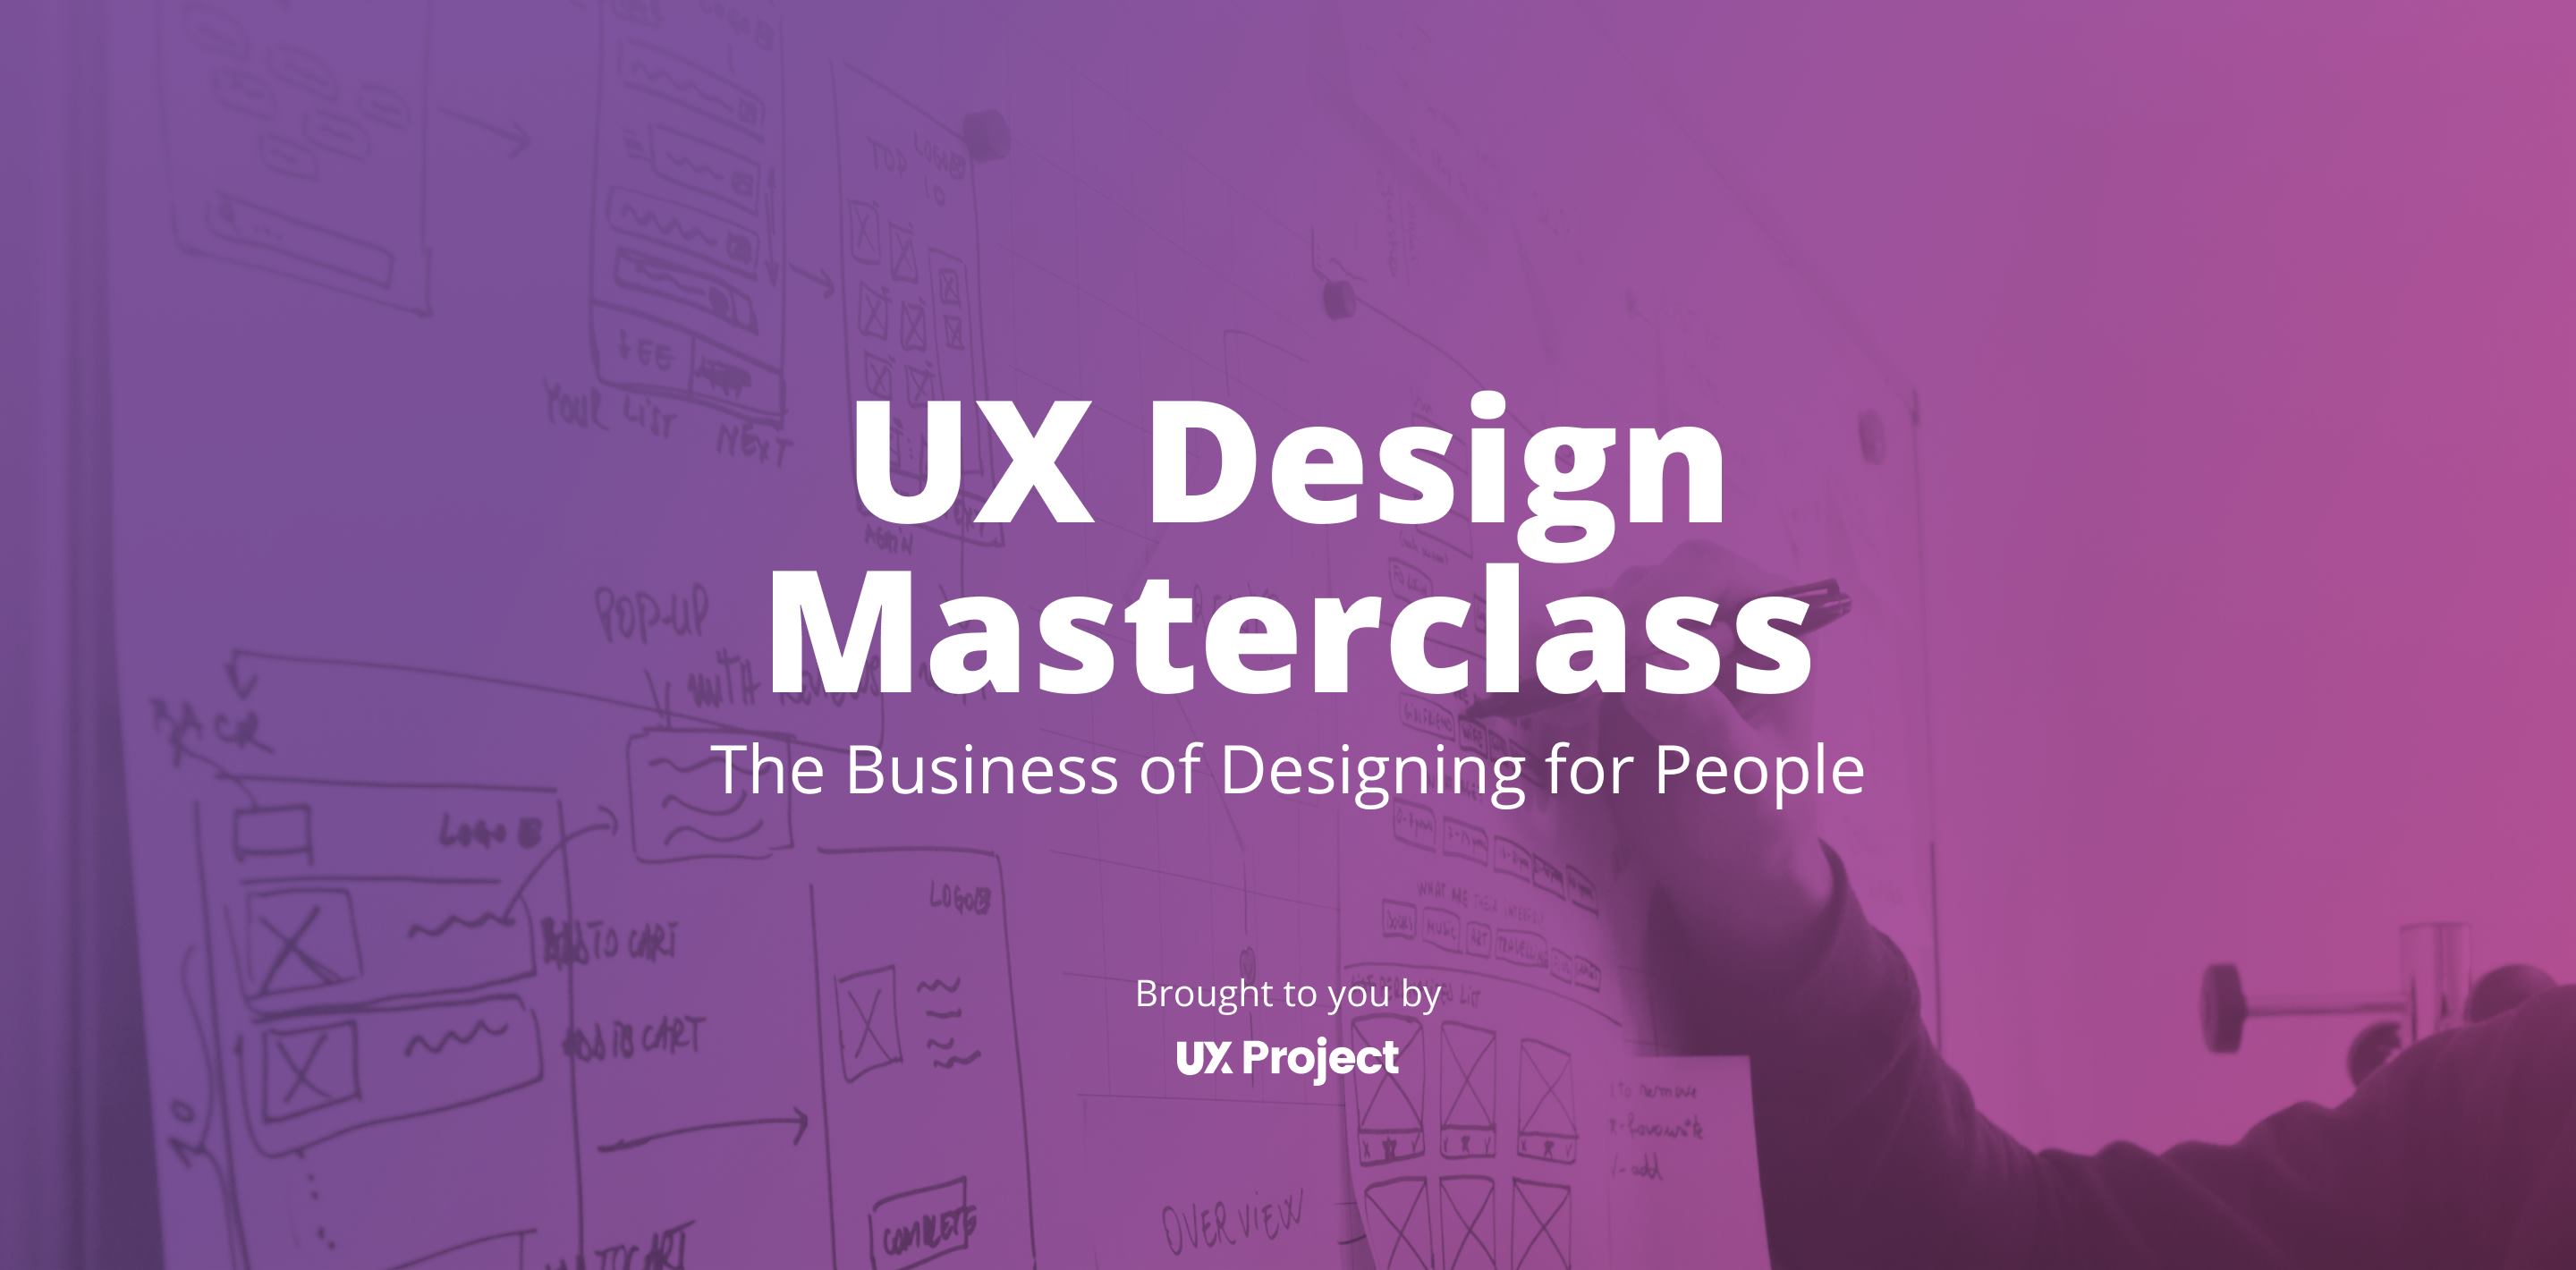 UX Design Masterclass: The Business of Designing for People